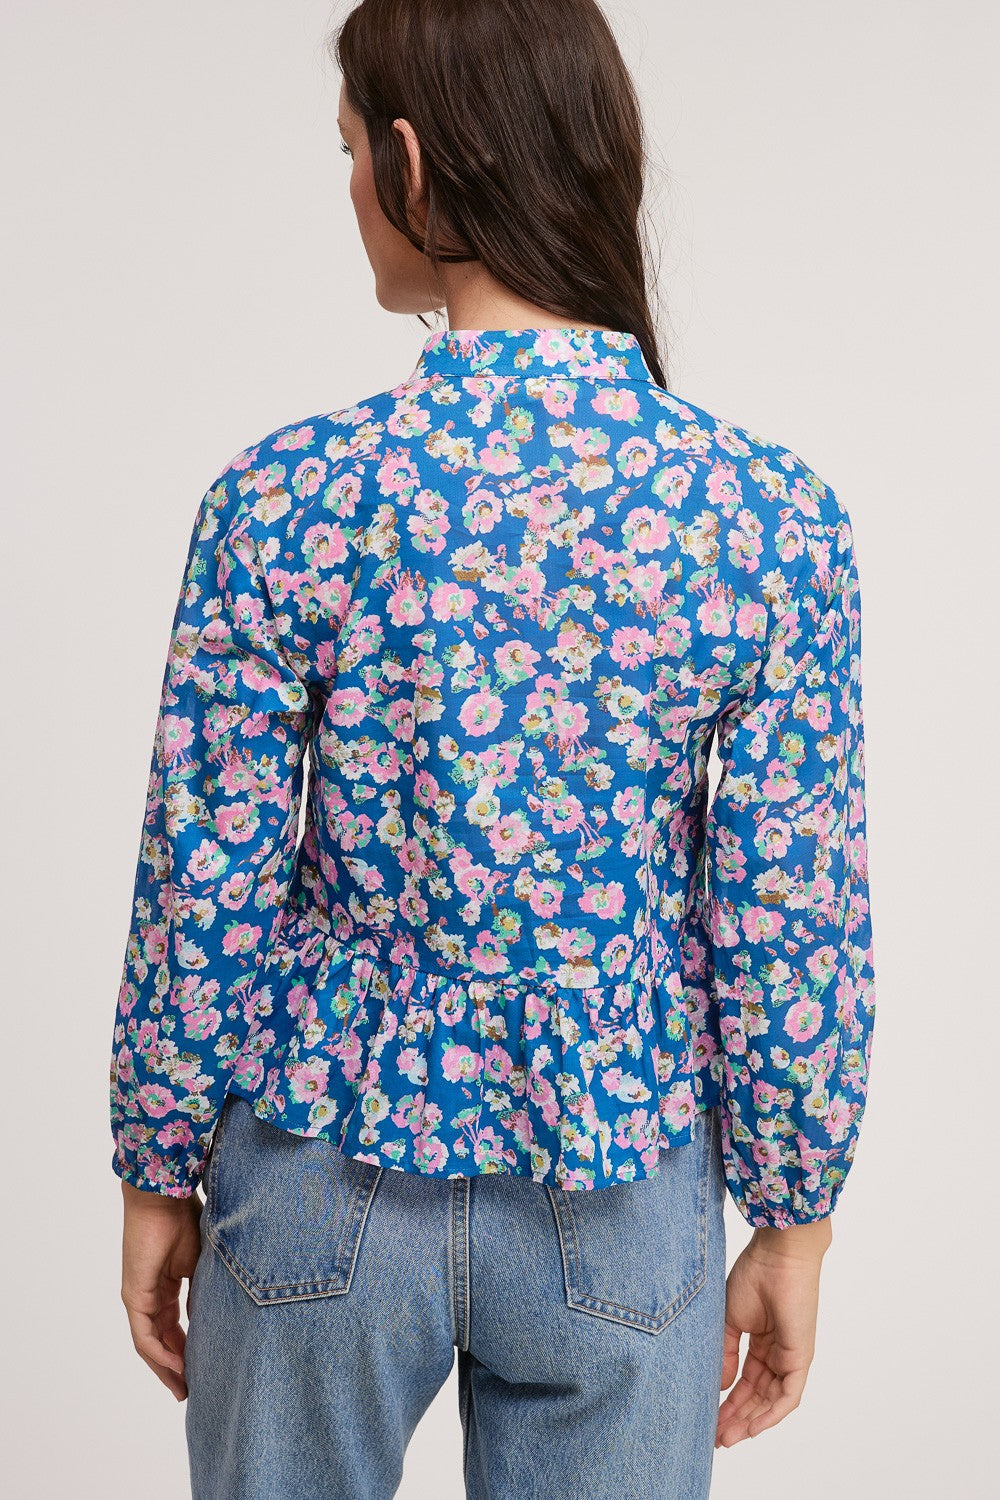 Apparel- Fanco Floral Embroidery Lace Top